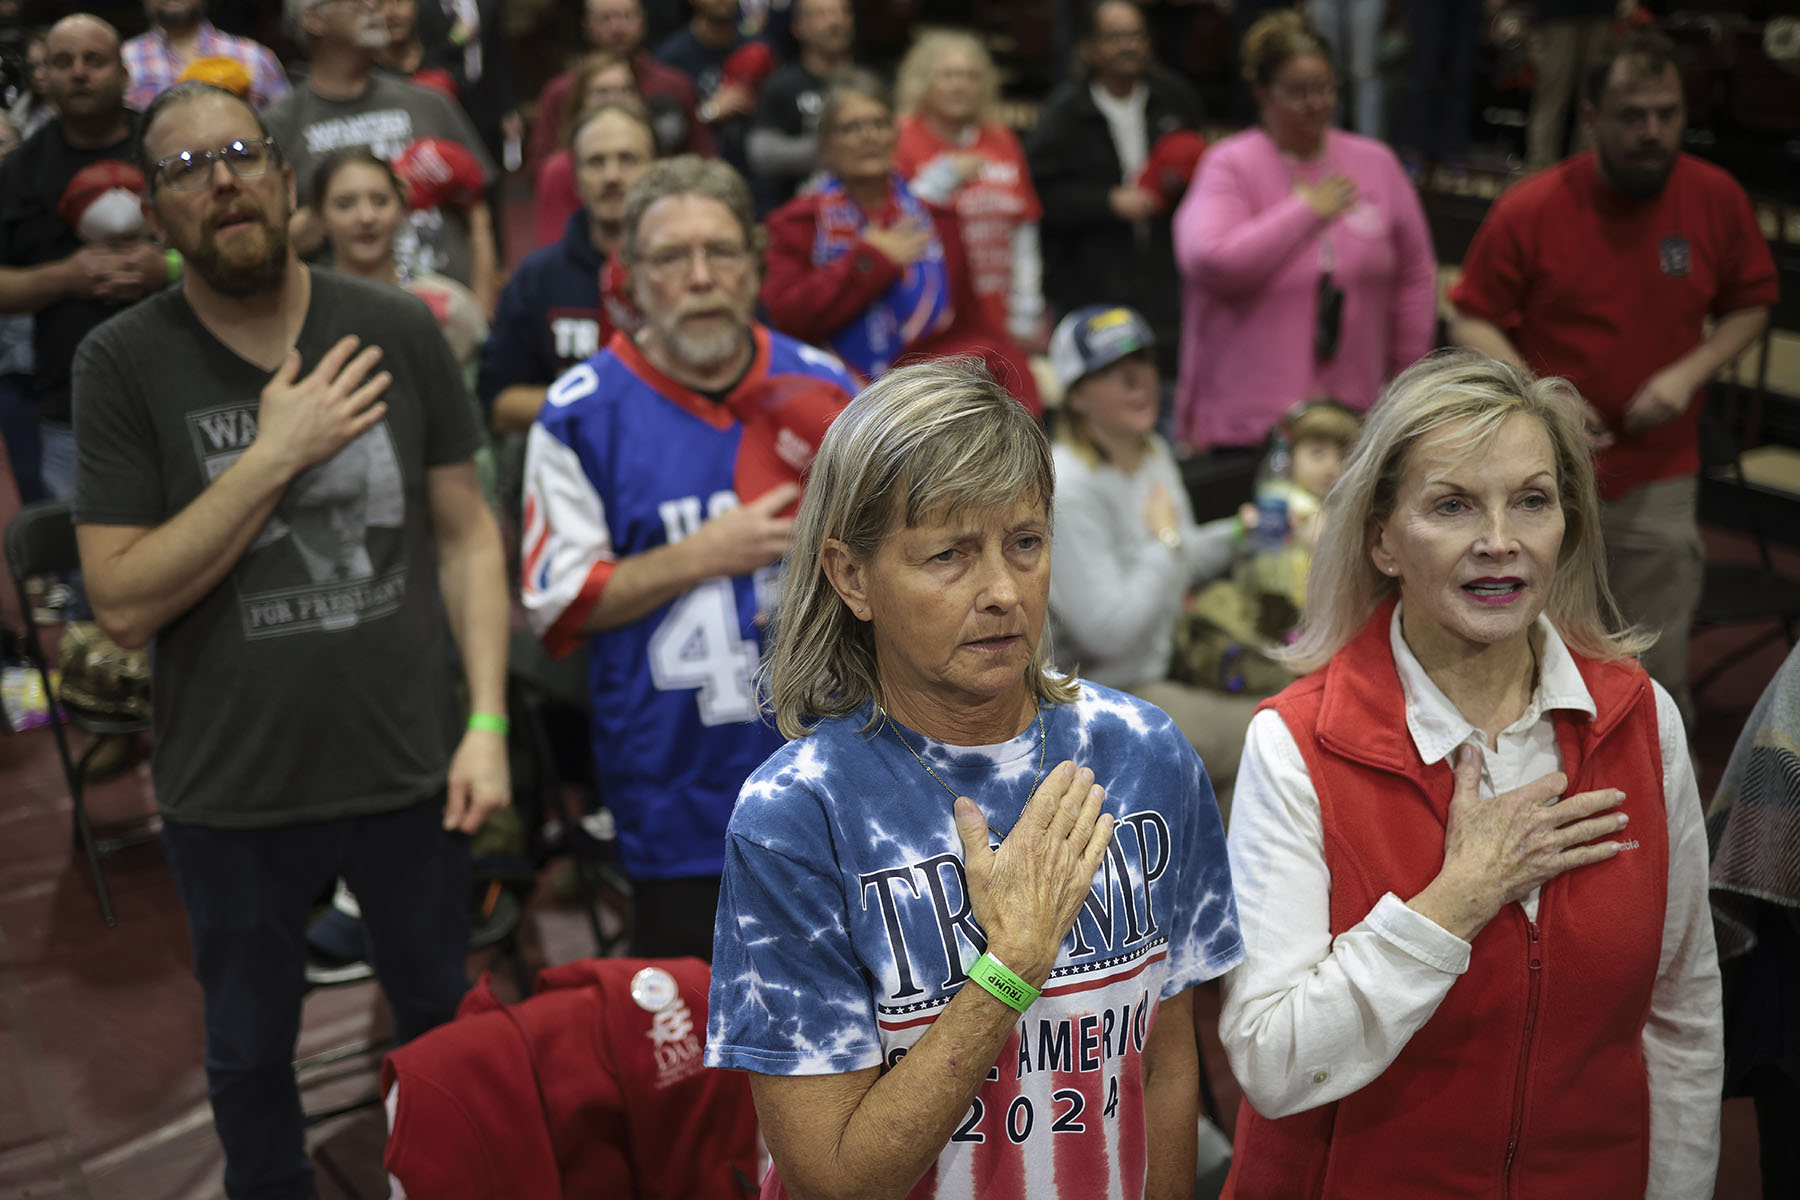 Supporters say the Pledge of Allegiance before Donald Trump speaks at a rally.